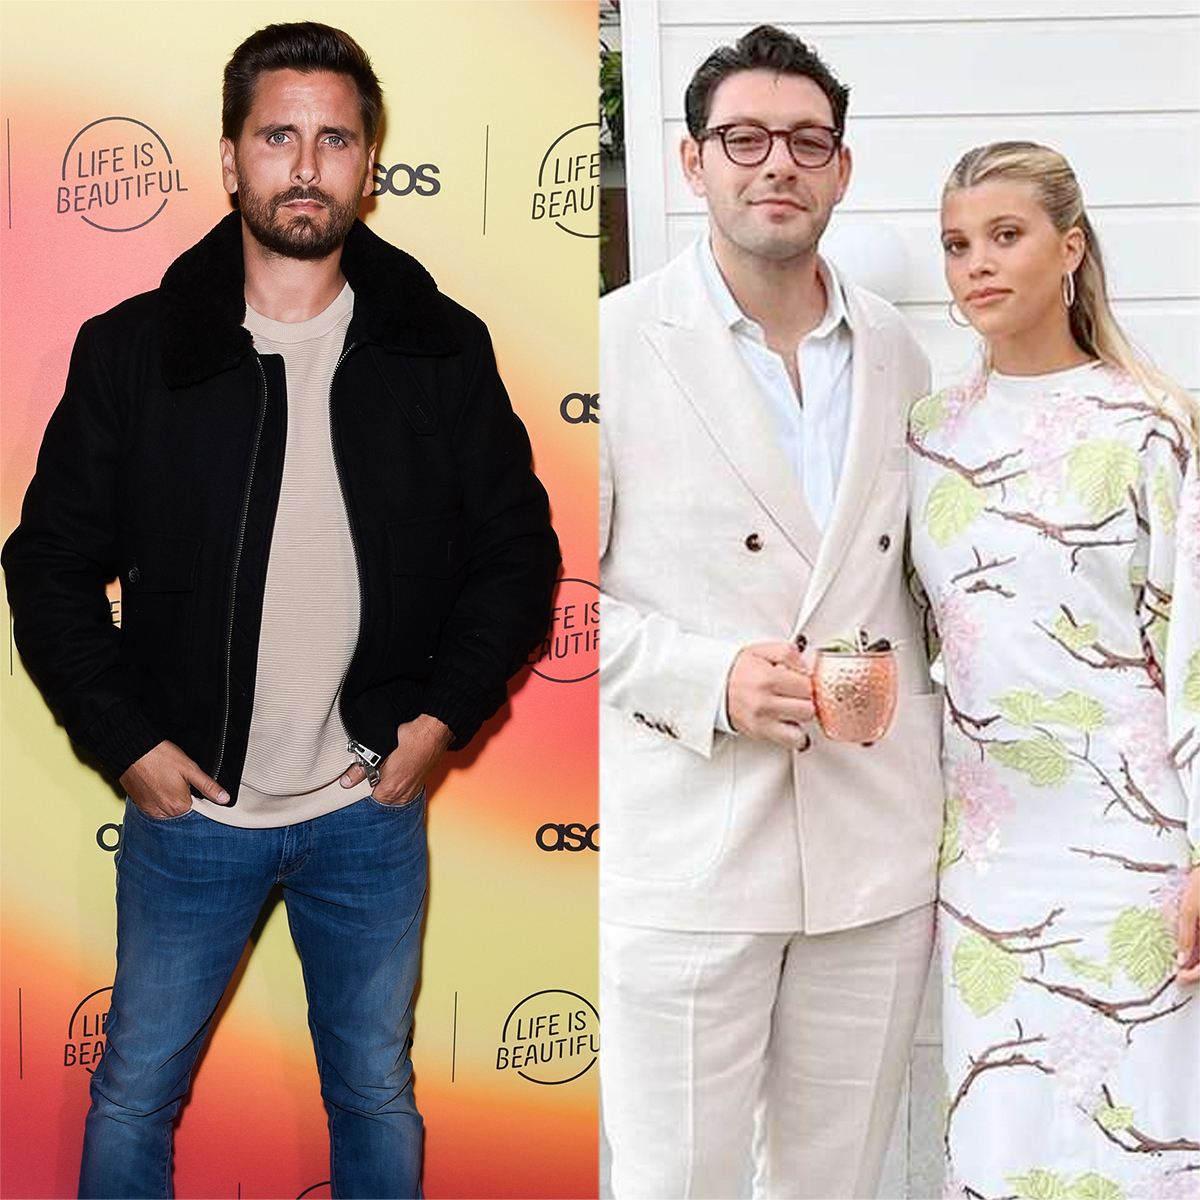 Inside Sofia Richie's ultimate celebrity wedding (complete with